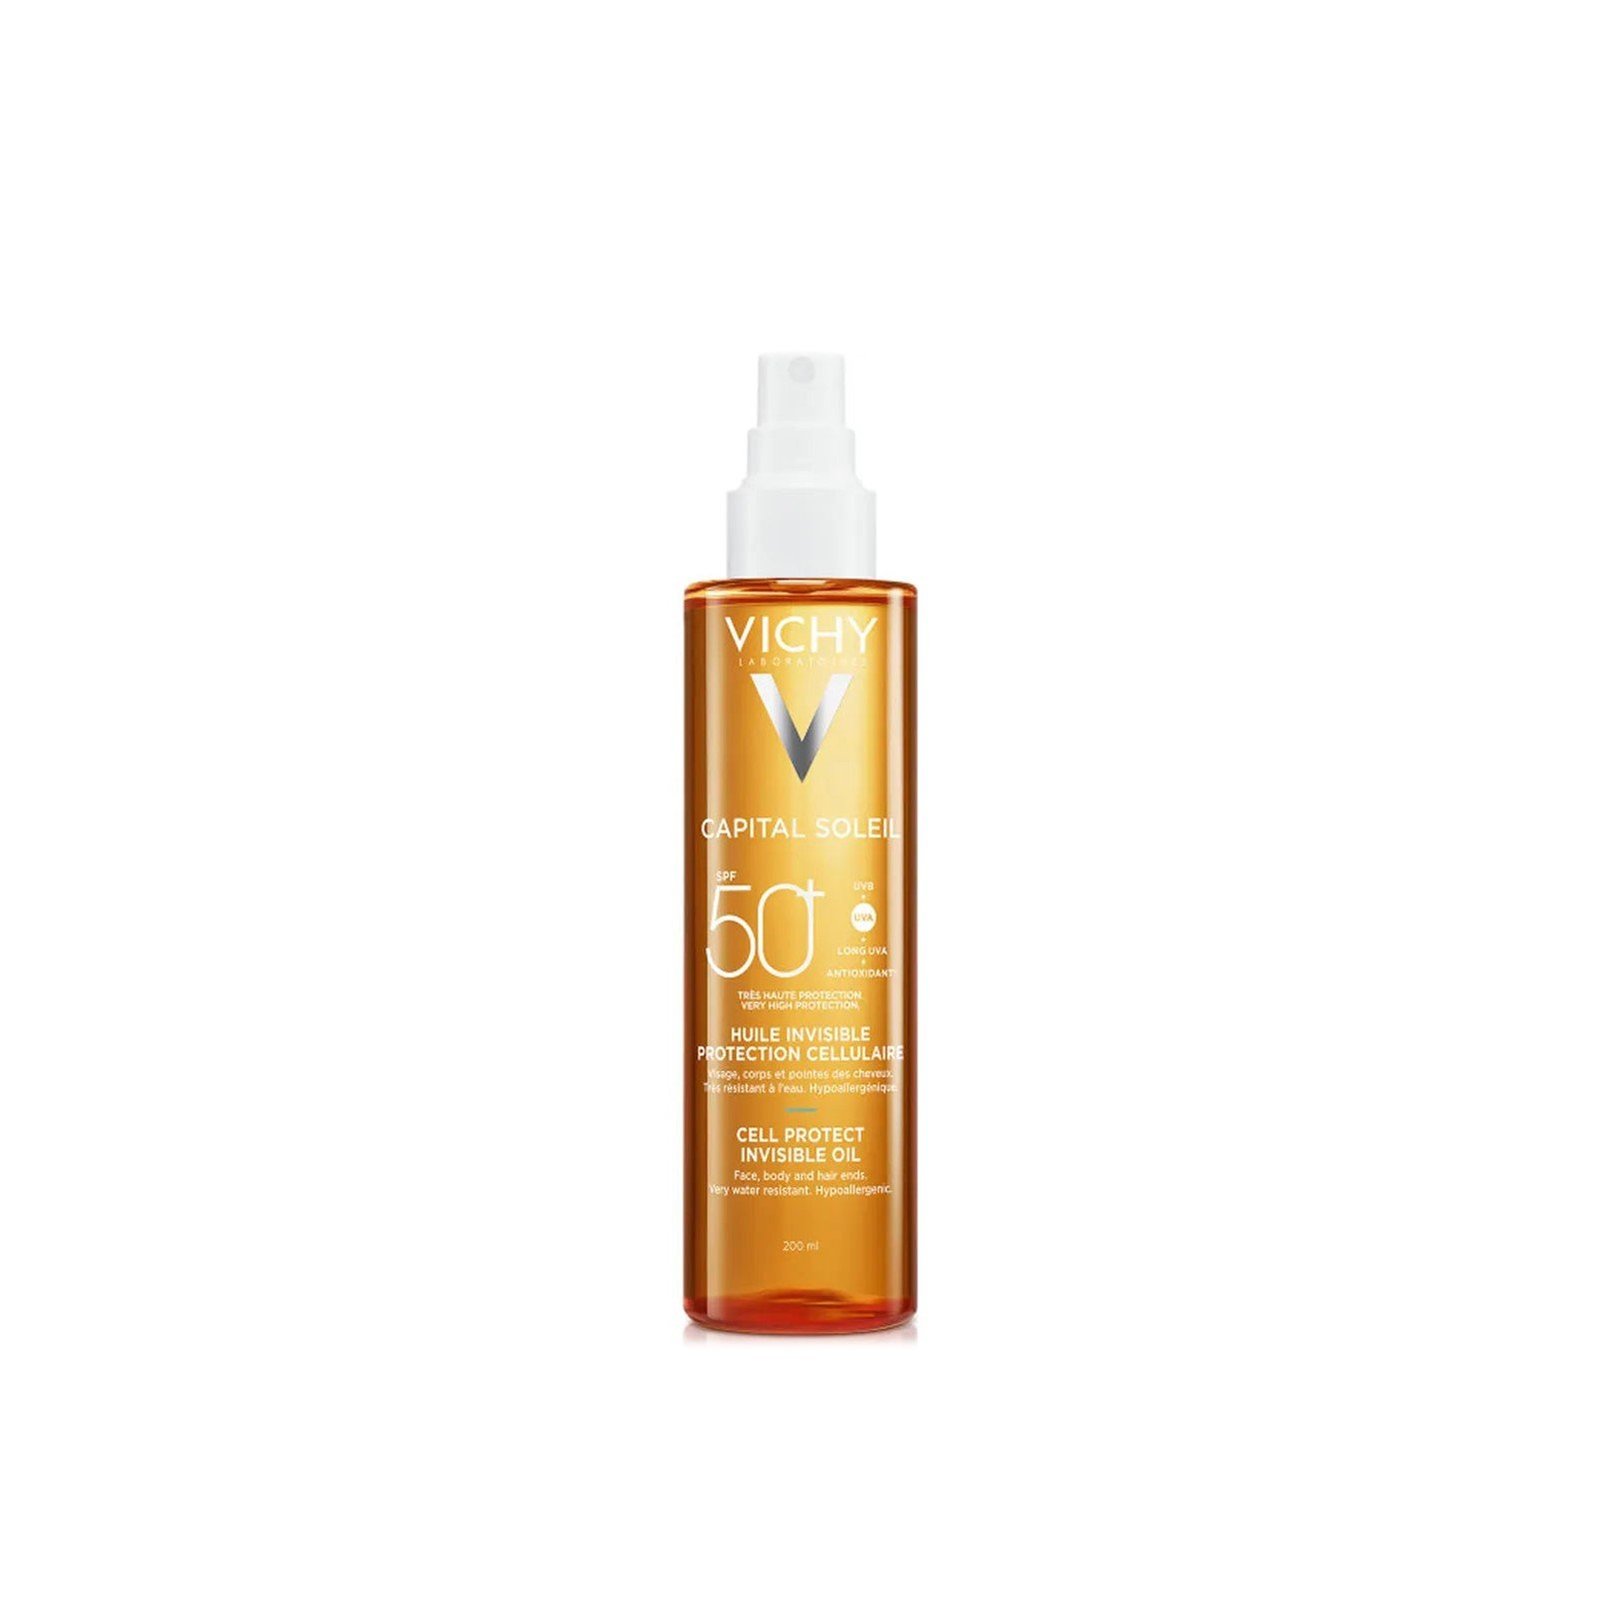 Vichy Capital Soleil Cell Protect Invisible Oil SPF50+ 200ml (6.76floz)